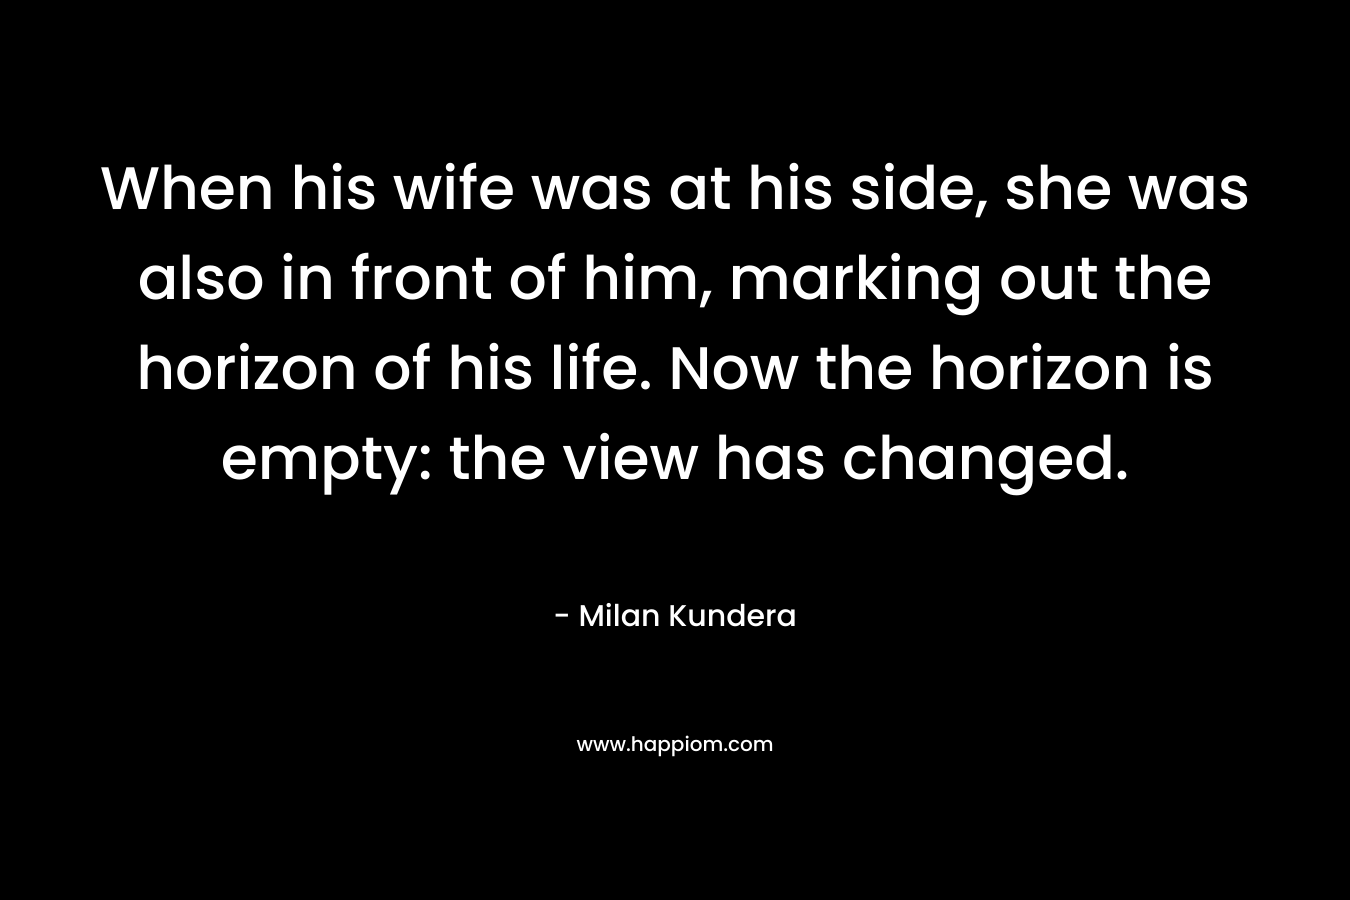 When his wife was at his side, she was also in front of him, marking out the horizon of his life. Now the horizon is empty: the view has changed.